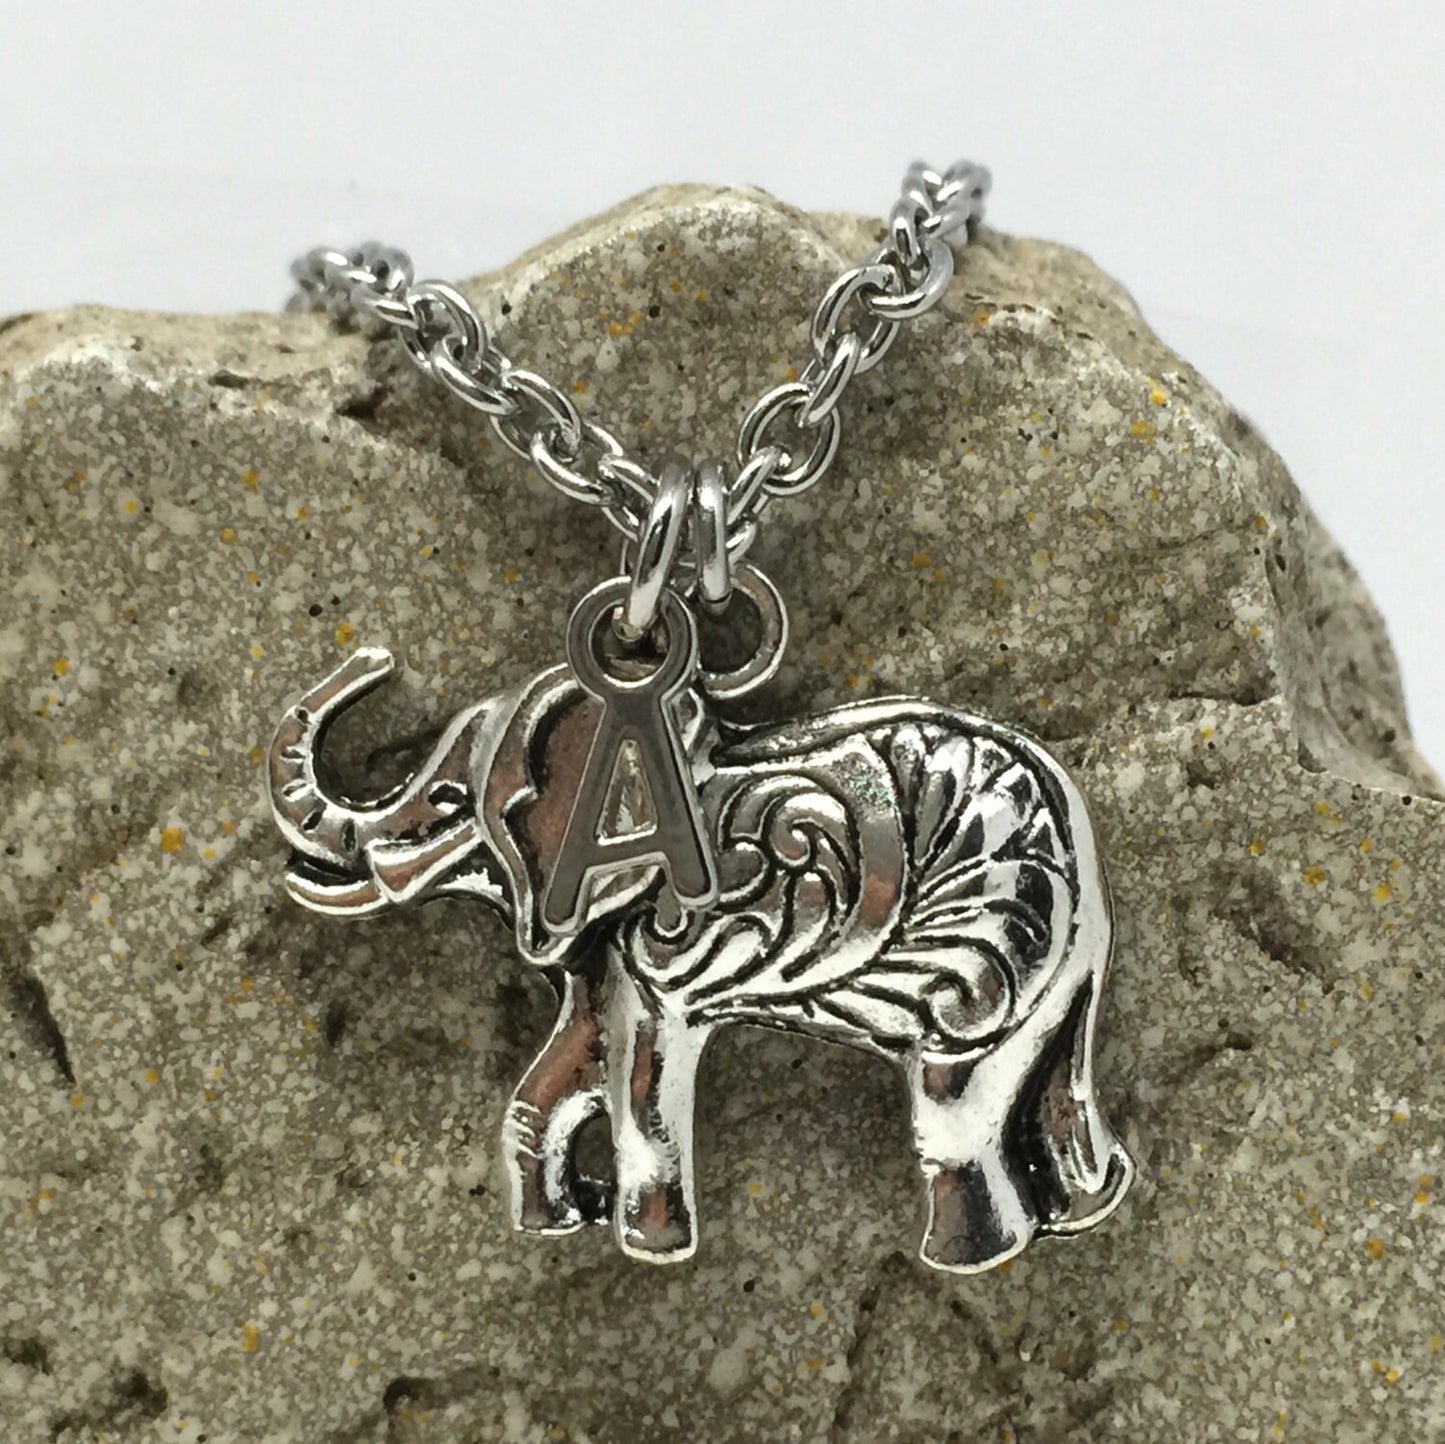 Elephant trunk up good luck charm necklace stainless steel sterling silver chain lead nickel free hypoallergenic